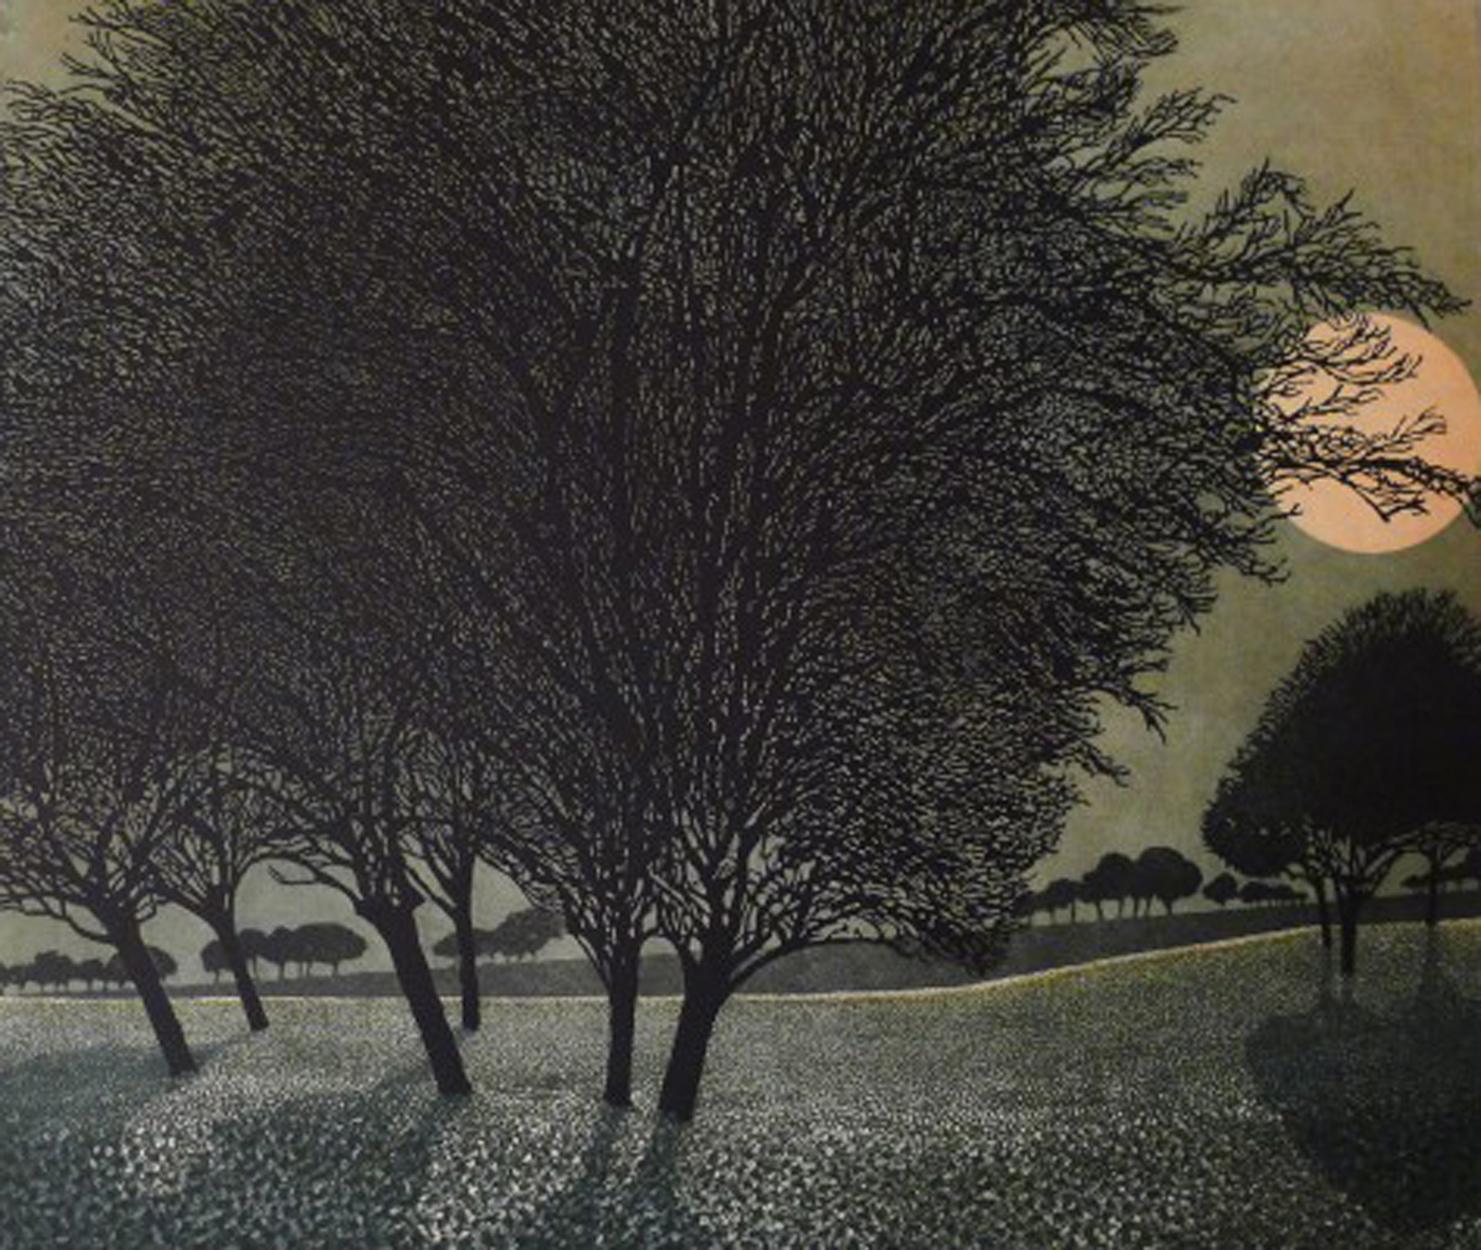 Primrose Morn (1st Image) - New Edition, etching and aquatint, edition size: 90 - Unframed.

Other images show other works available by this artist.


Phil Greenwood was born in 1943 in Dolgellau, North Wales and now lives in Kent. Educated at